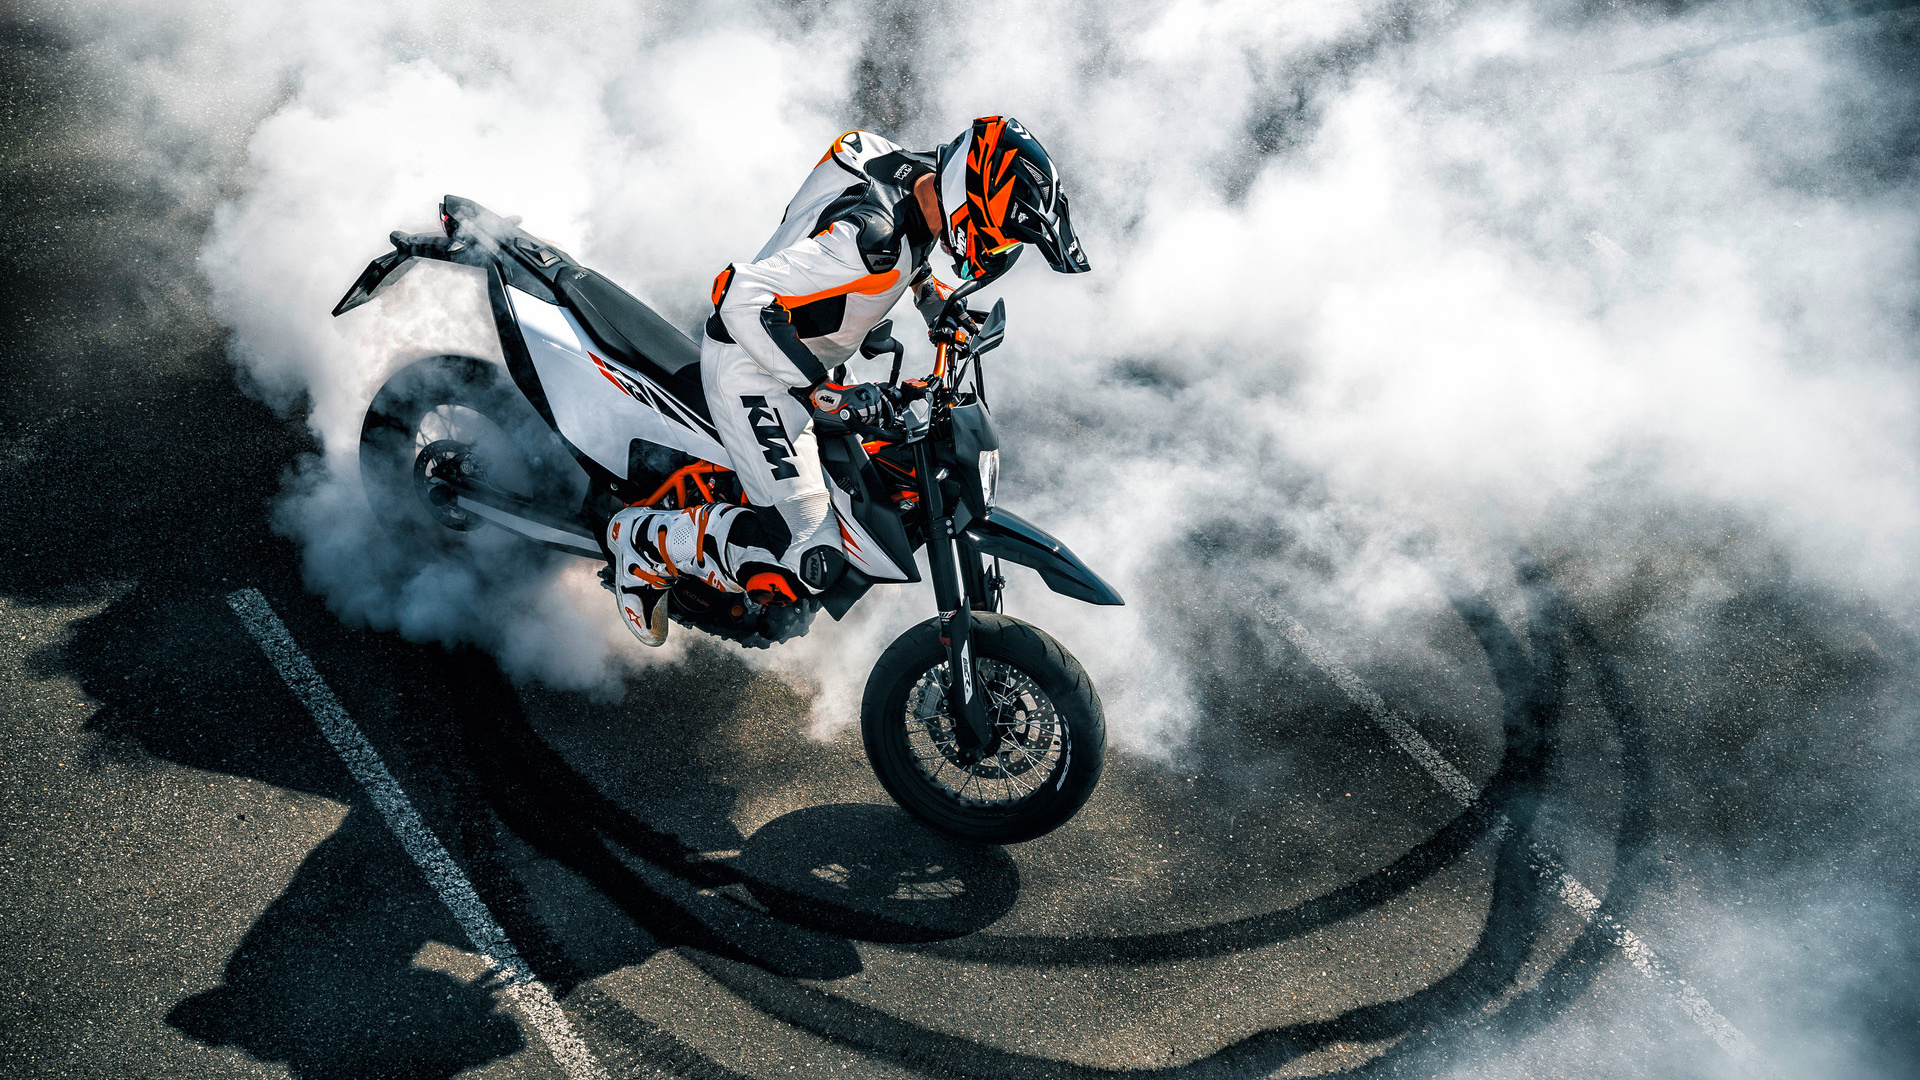 Supermoto: The Superbike International German Championships, Drifting, Off-road motorcycles. 1920x1080 Full HD Background.